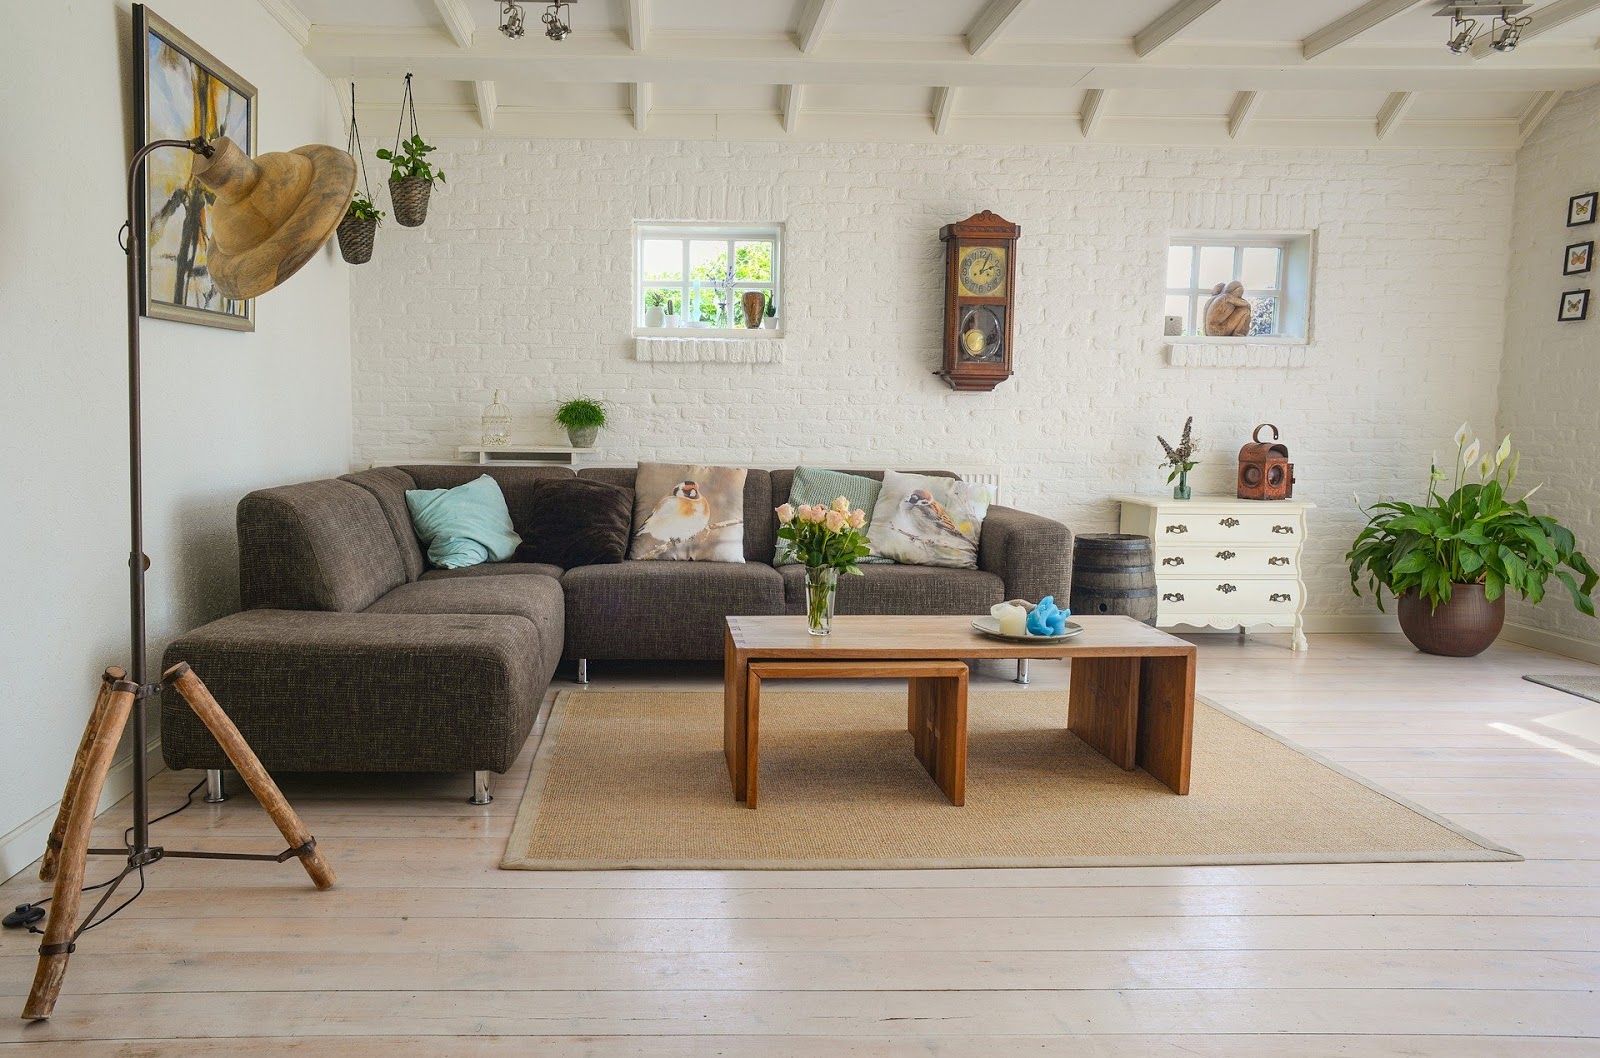 How To Add Personality To A Rental Home